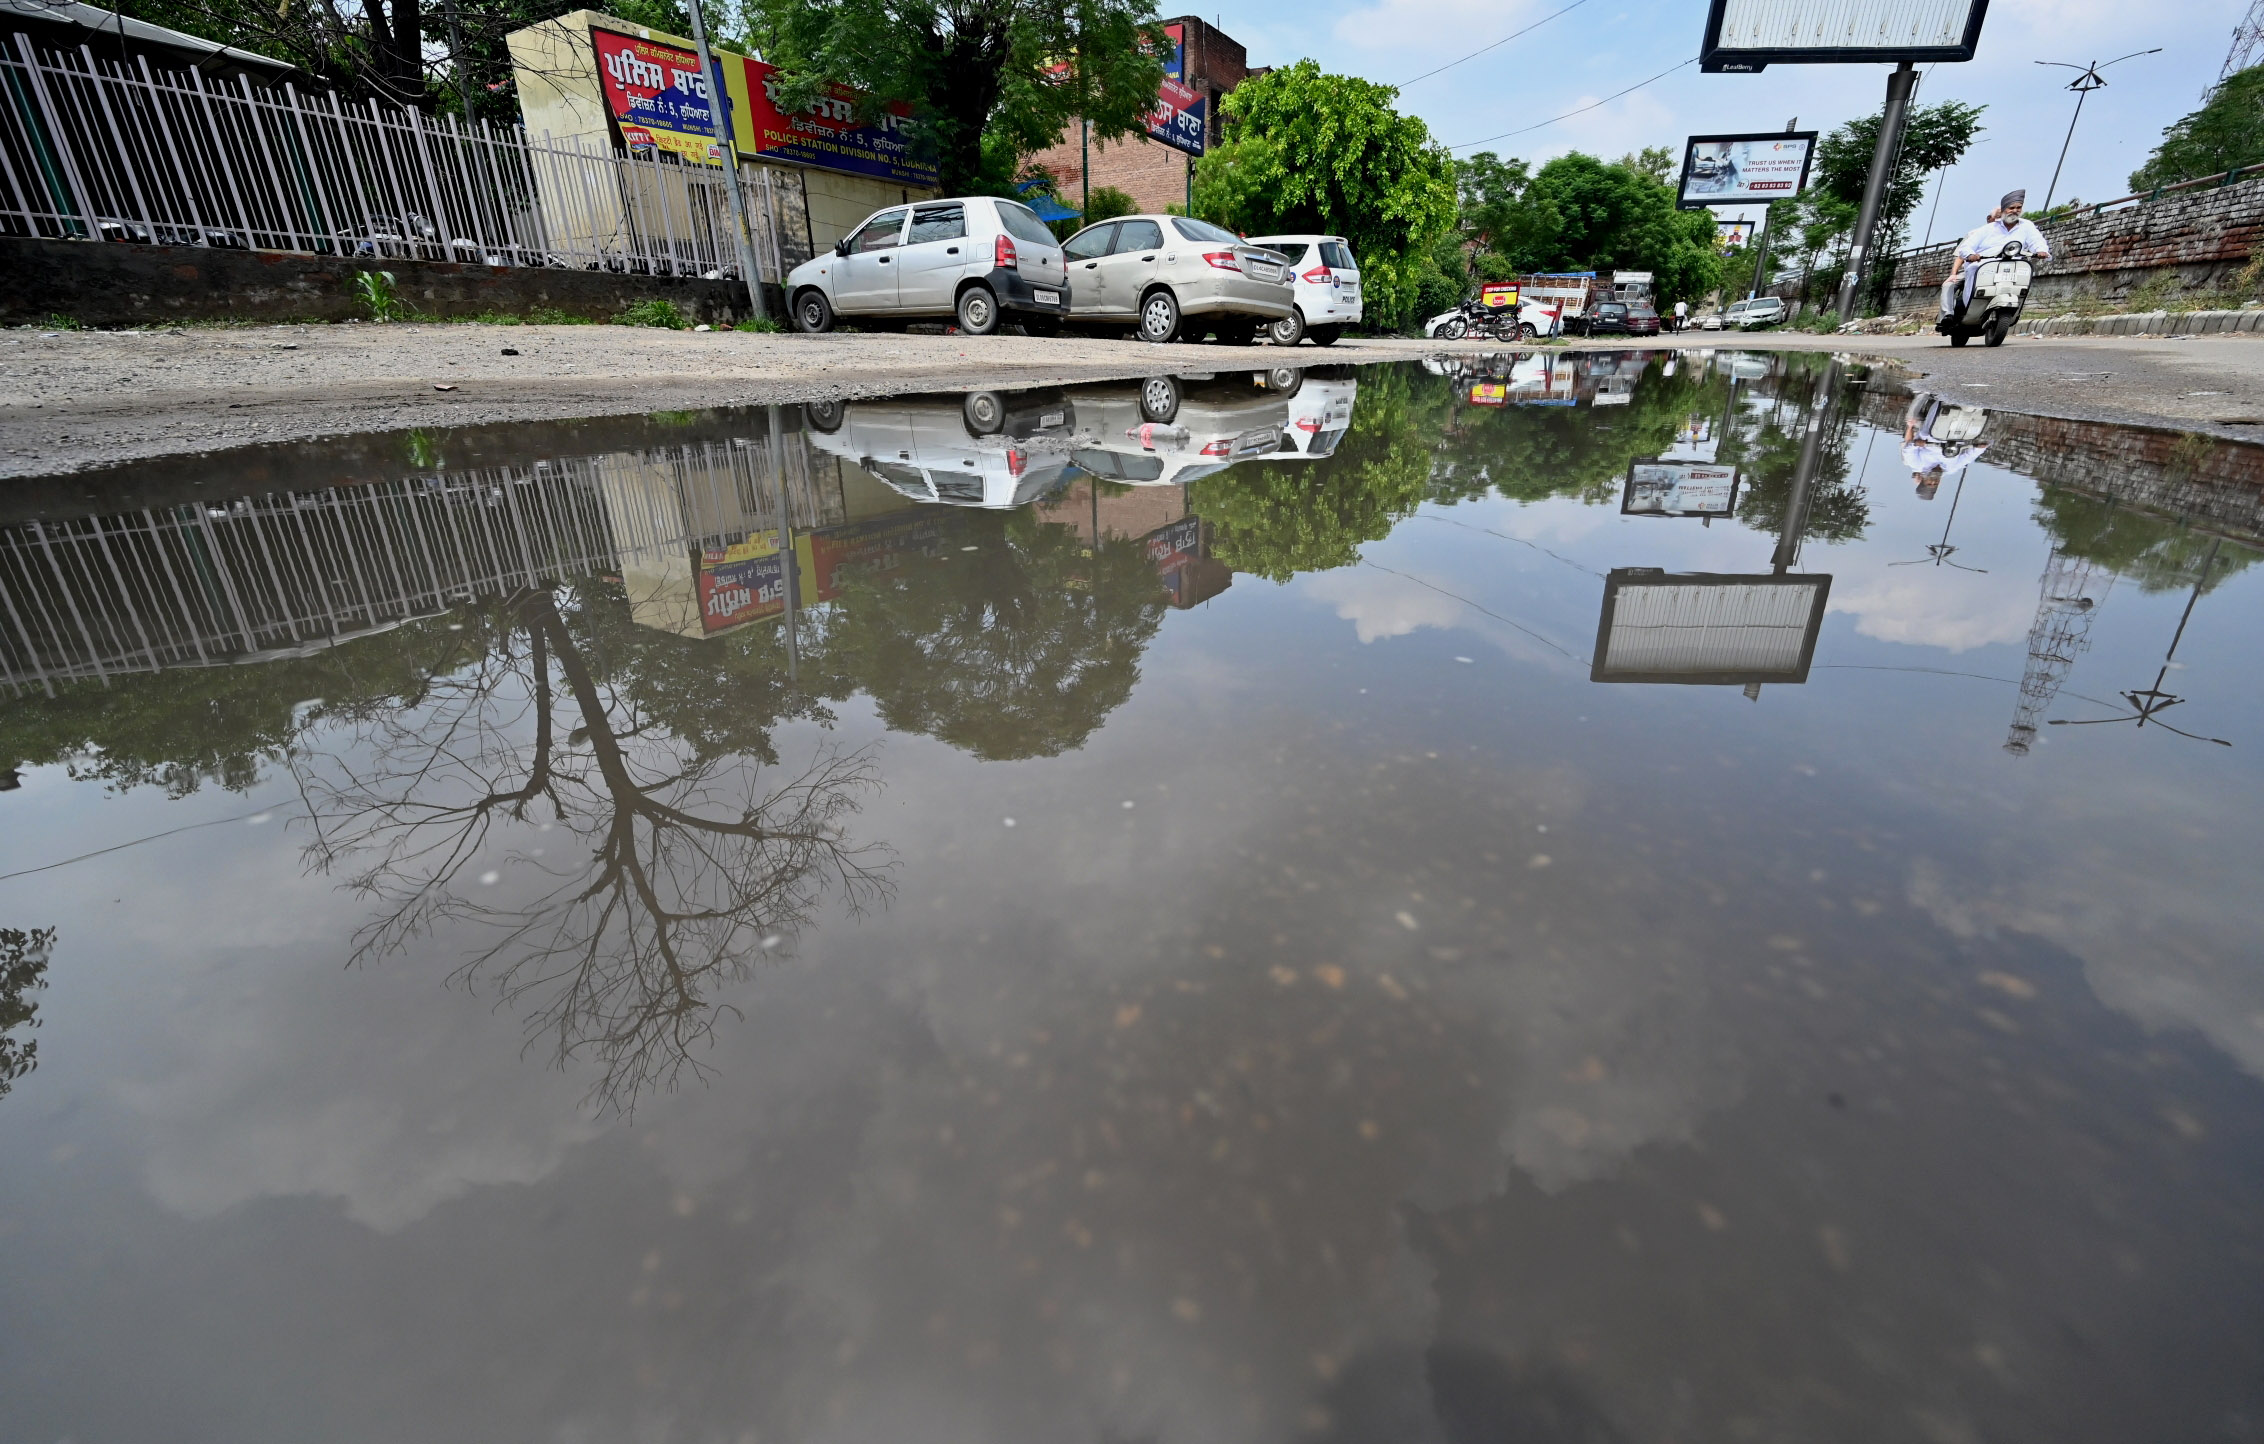 Over 80% of Ludhiana city areas lack storm water drainage system